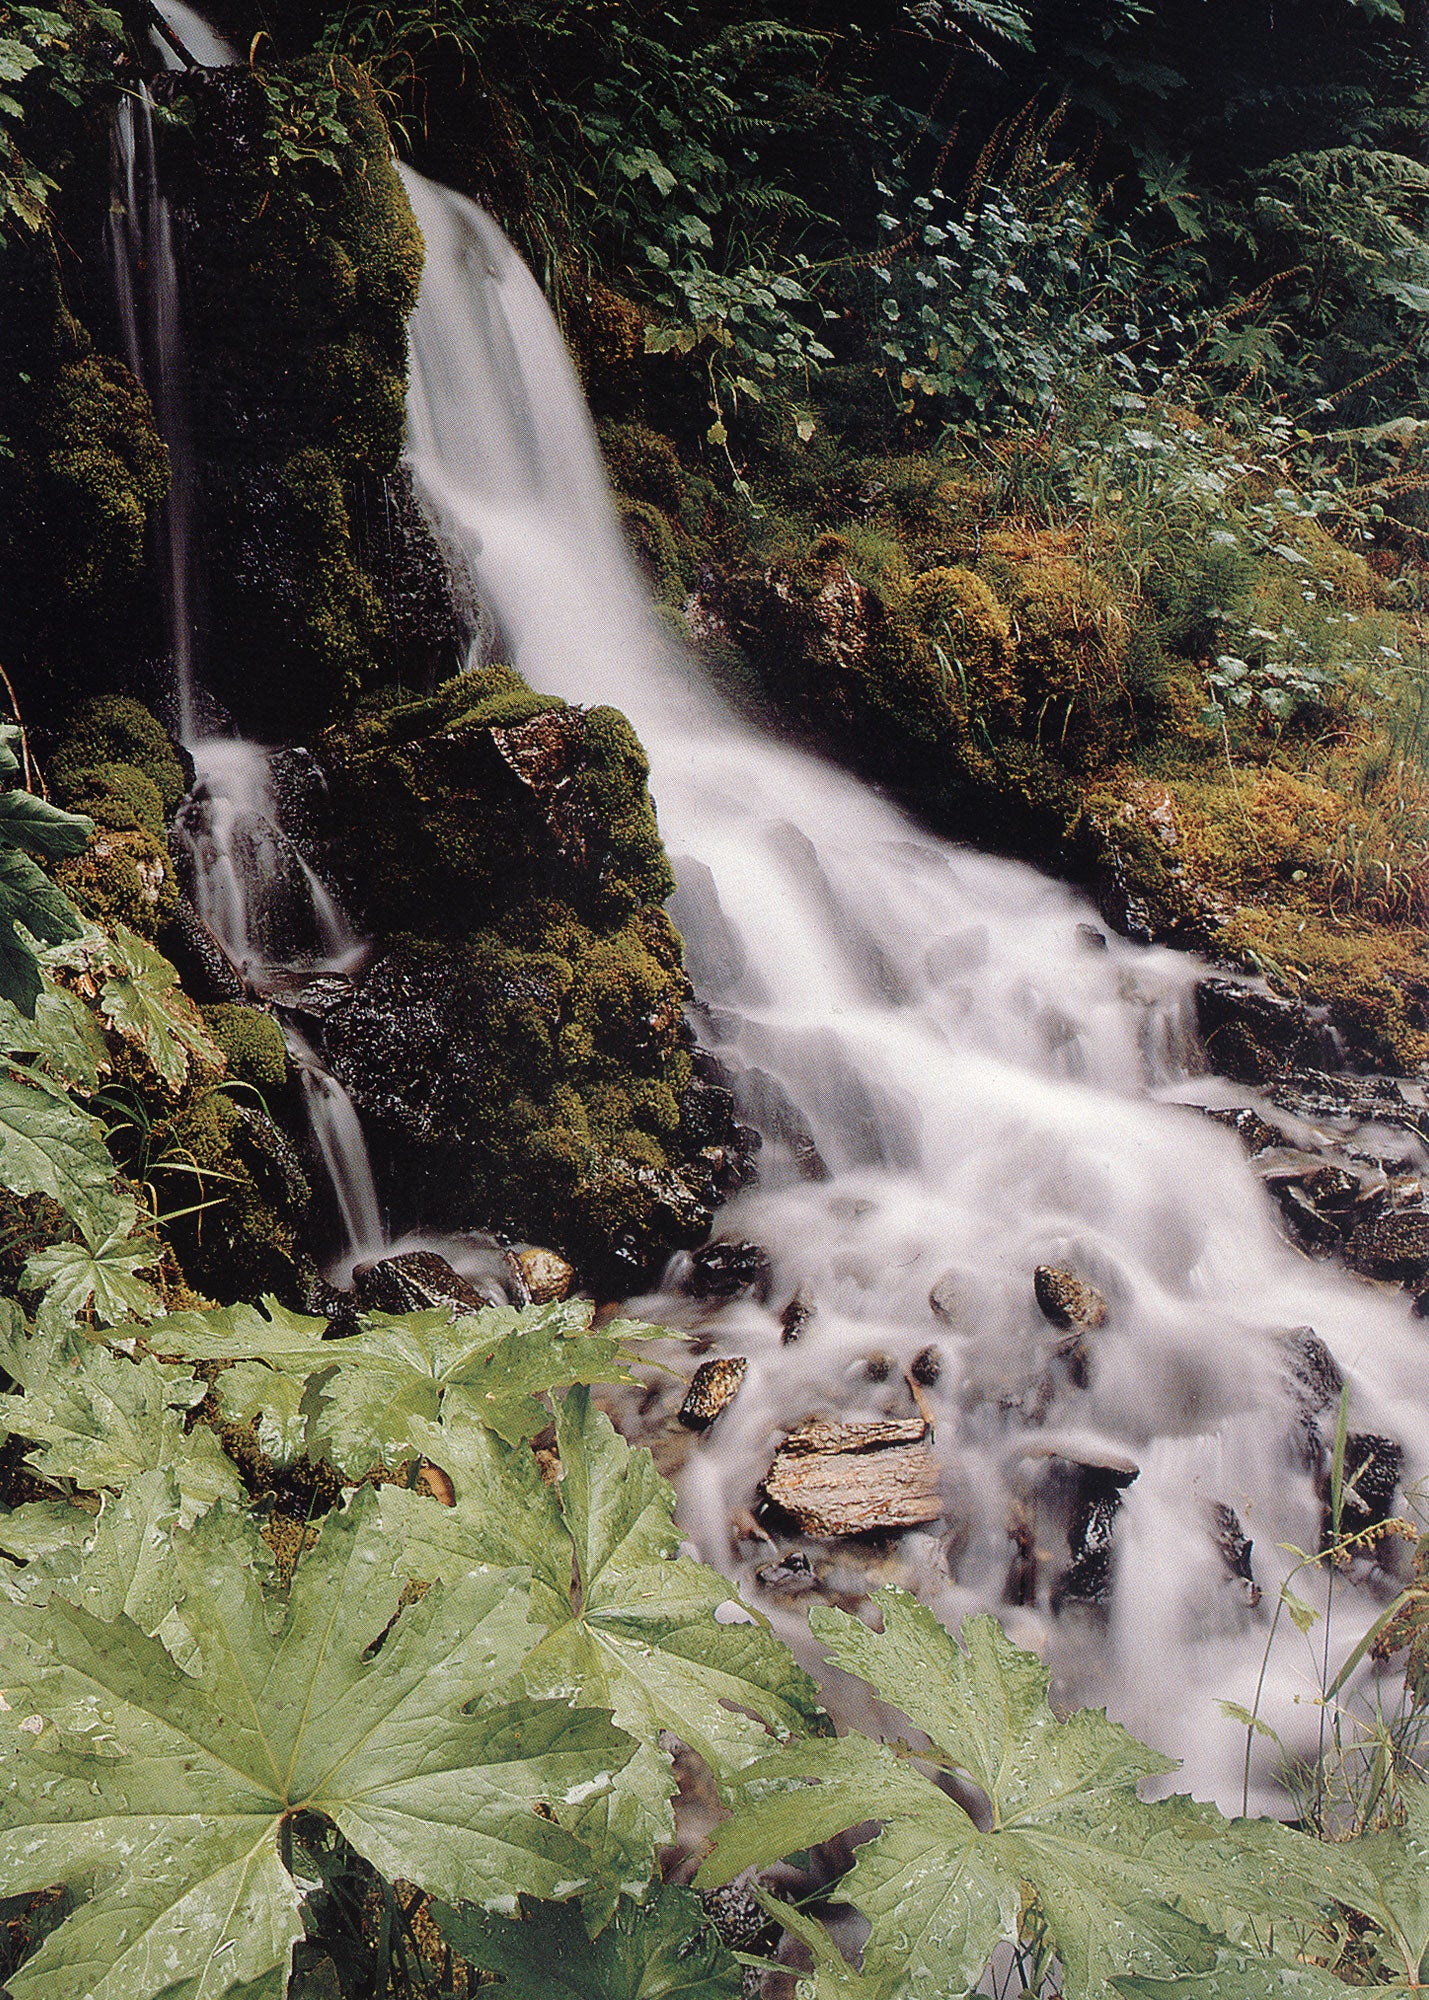 A shot of a waterfall, surrounded by foliage and mossy rocks. End of image description.